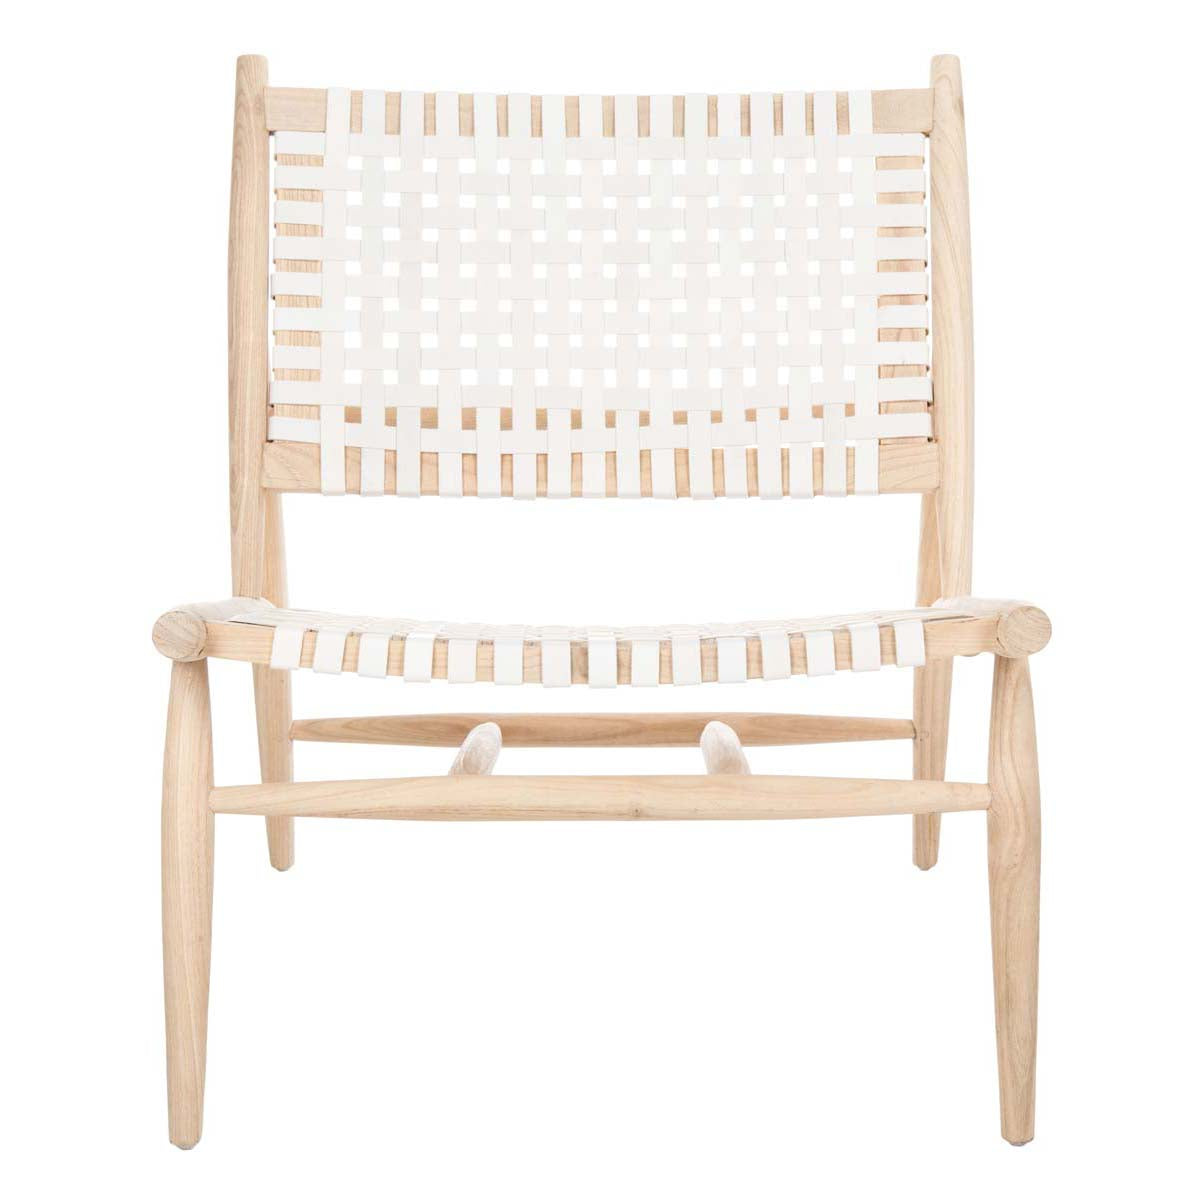 Safavieh Soleil Leather Woven Accent Chair , ACH1001 - White Leather/Natural